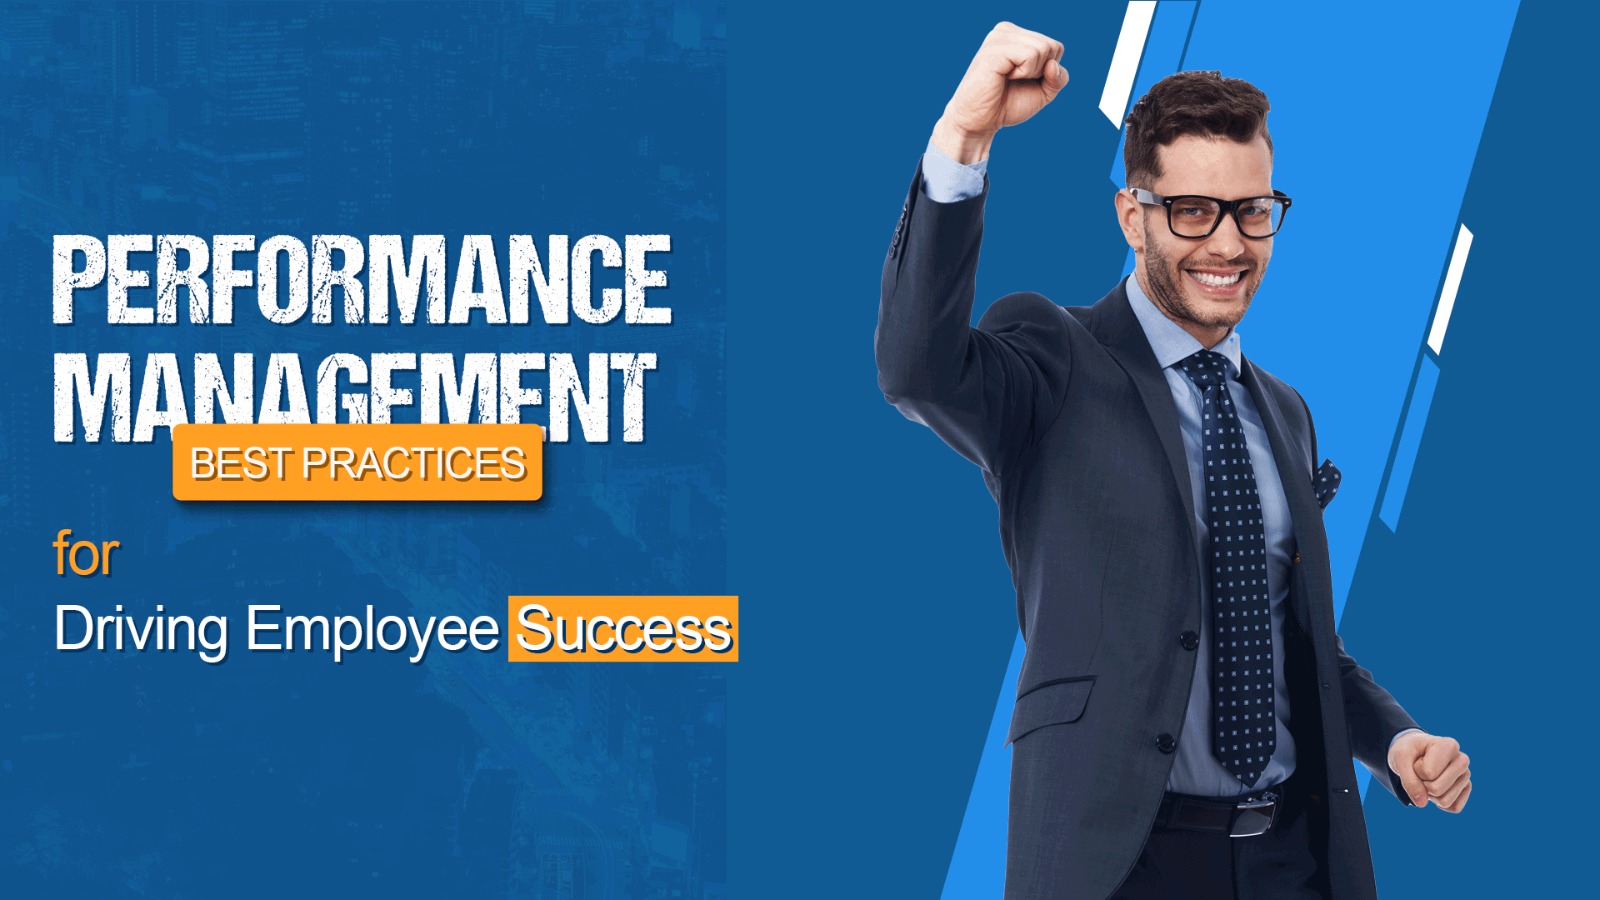 Performance Management: Best Practices for Driving Employee Success